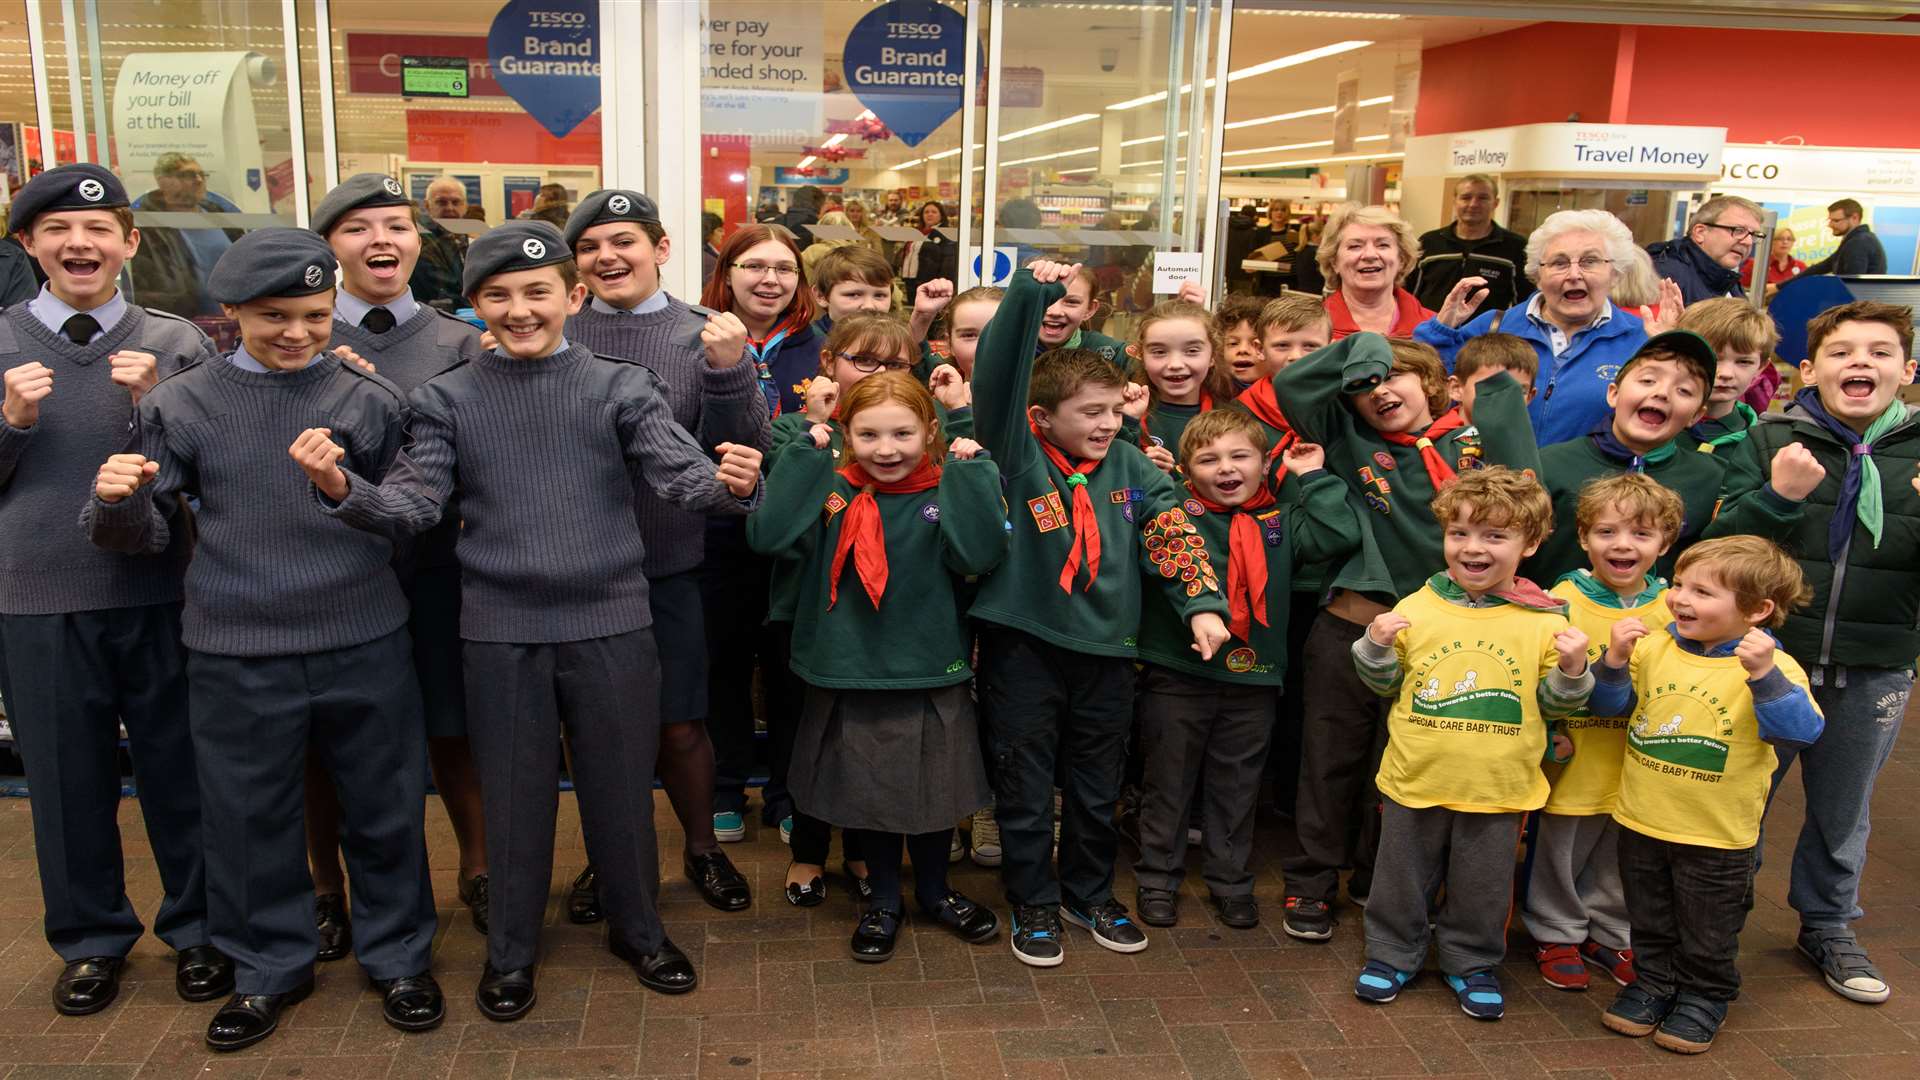 The Gillingham Scouts, Oliver Fisher Special Care Baby Trust, 25 Parkwood Squadron Air Training Corps and Hospital Radio Medway, were all given £500 by Tesco.